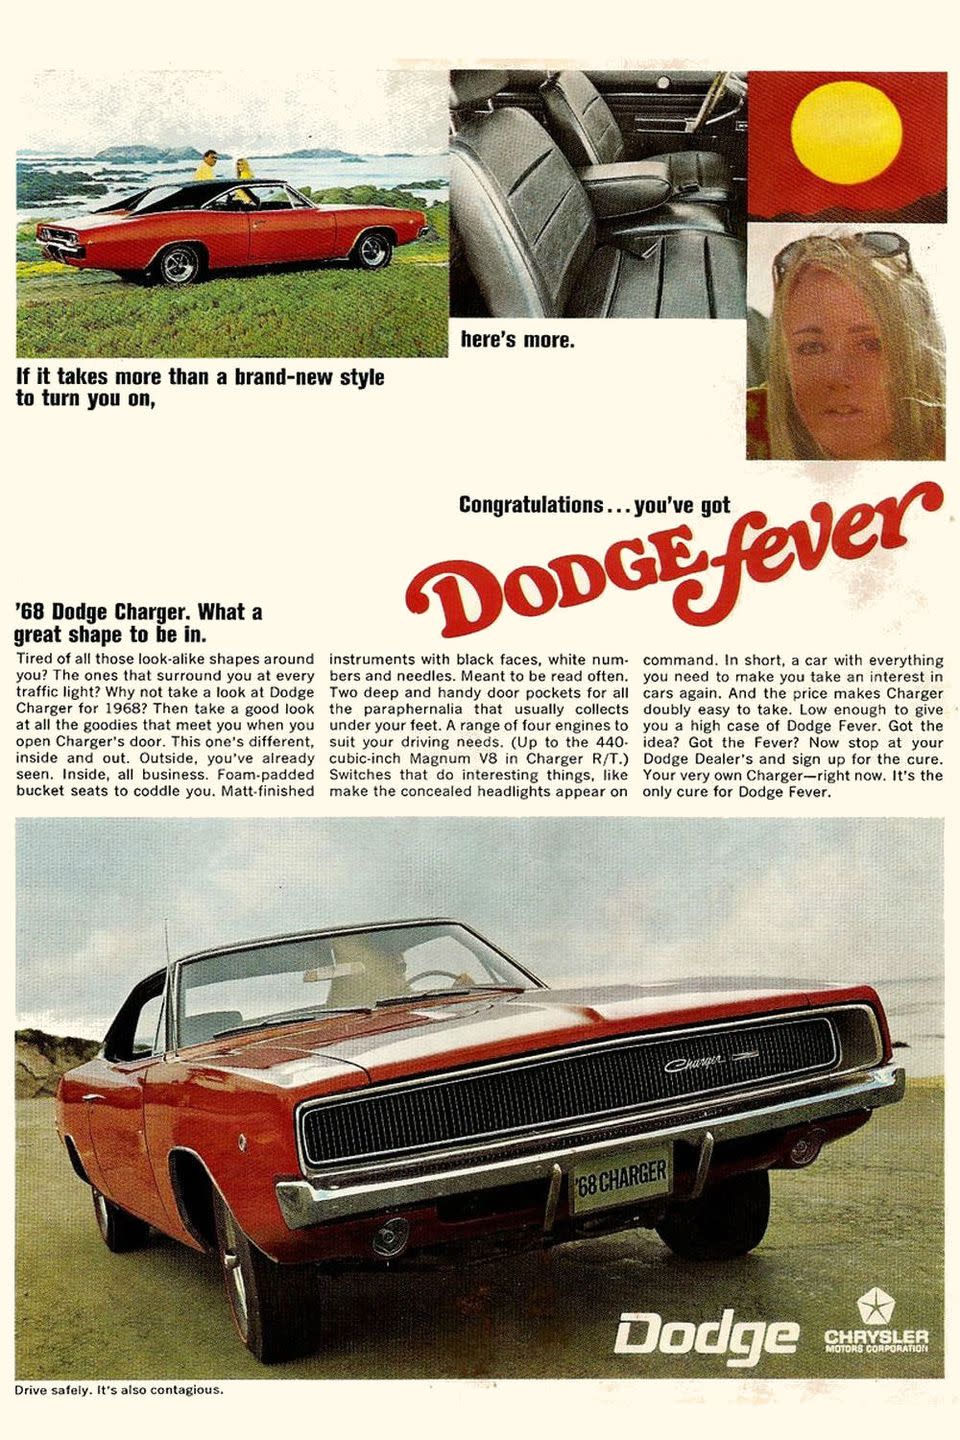 1968: Dodge Charger